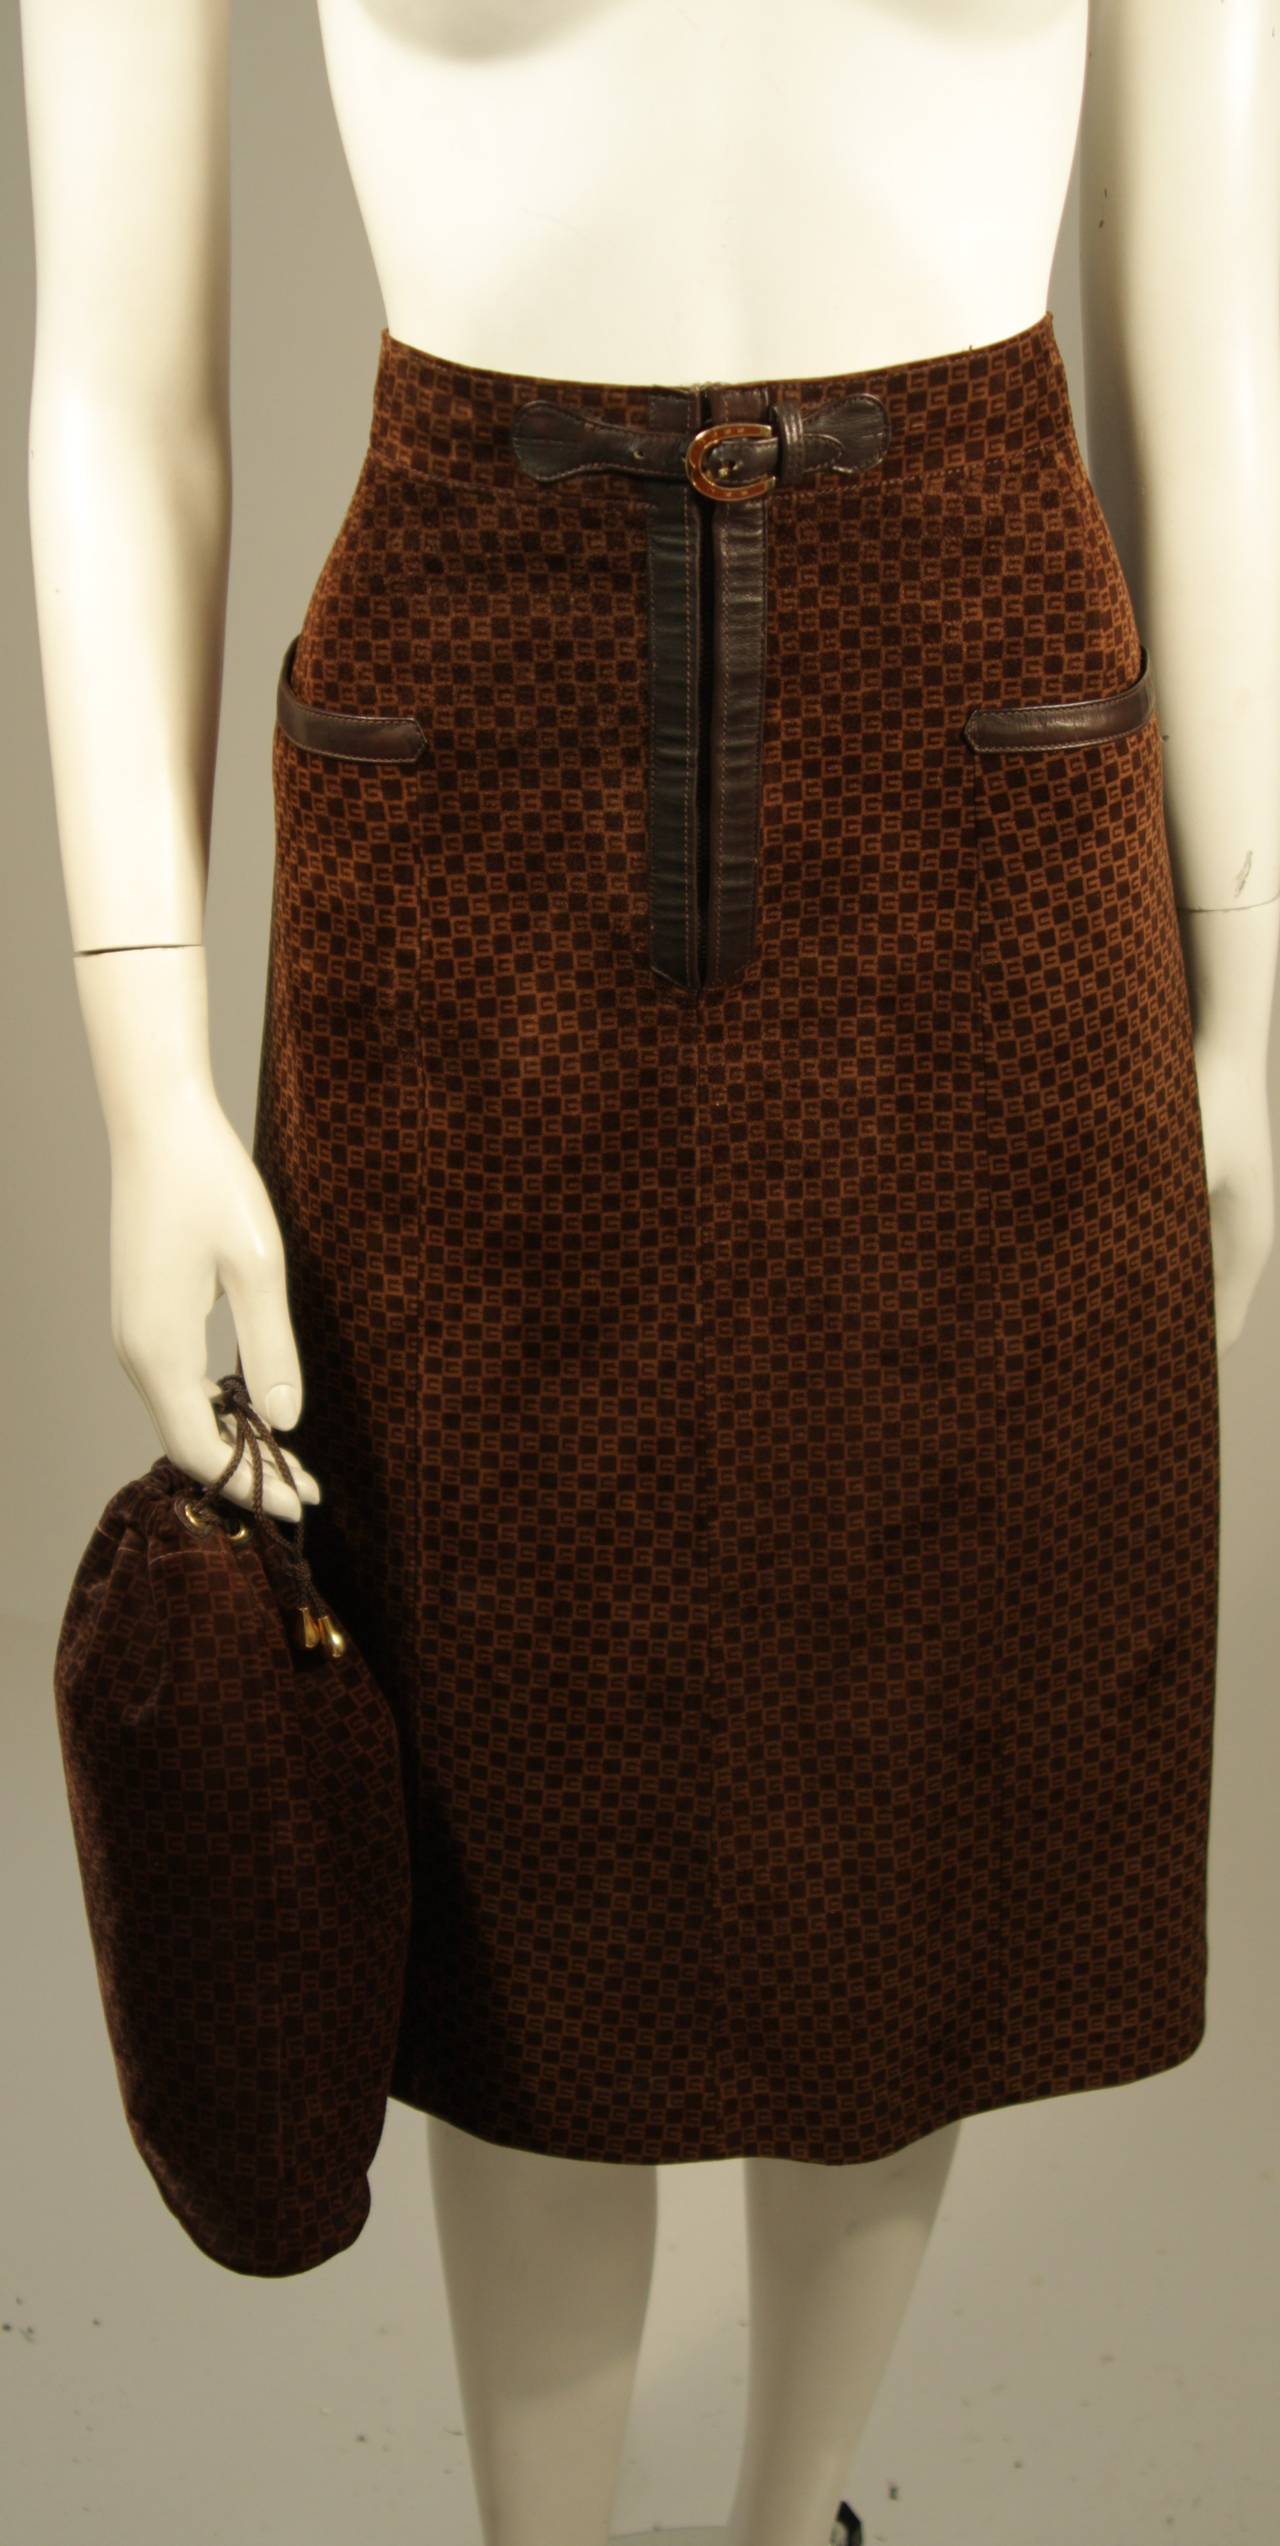 This Gucci skirt is composed of a brown suede with Gucci logo print and gold horse shoe waist buckle detail. There is a zipper closure. Photographed with Gucci purse which is sold separately, please contact us for details. 

Measures